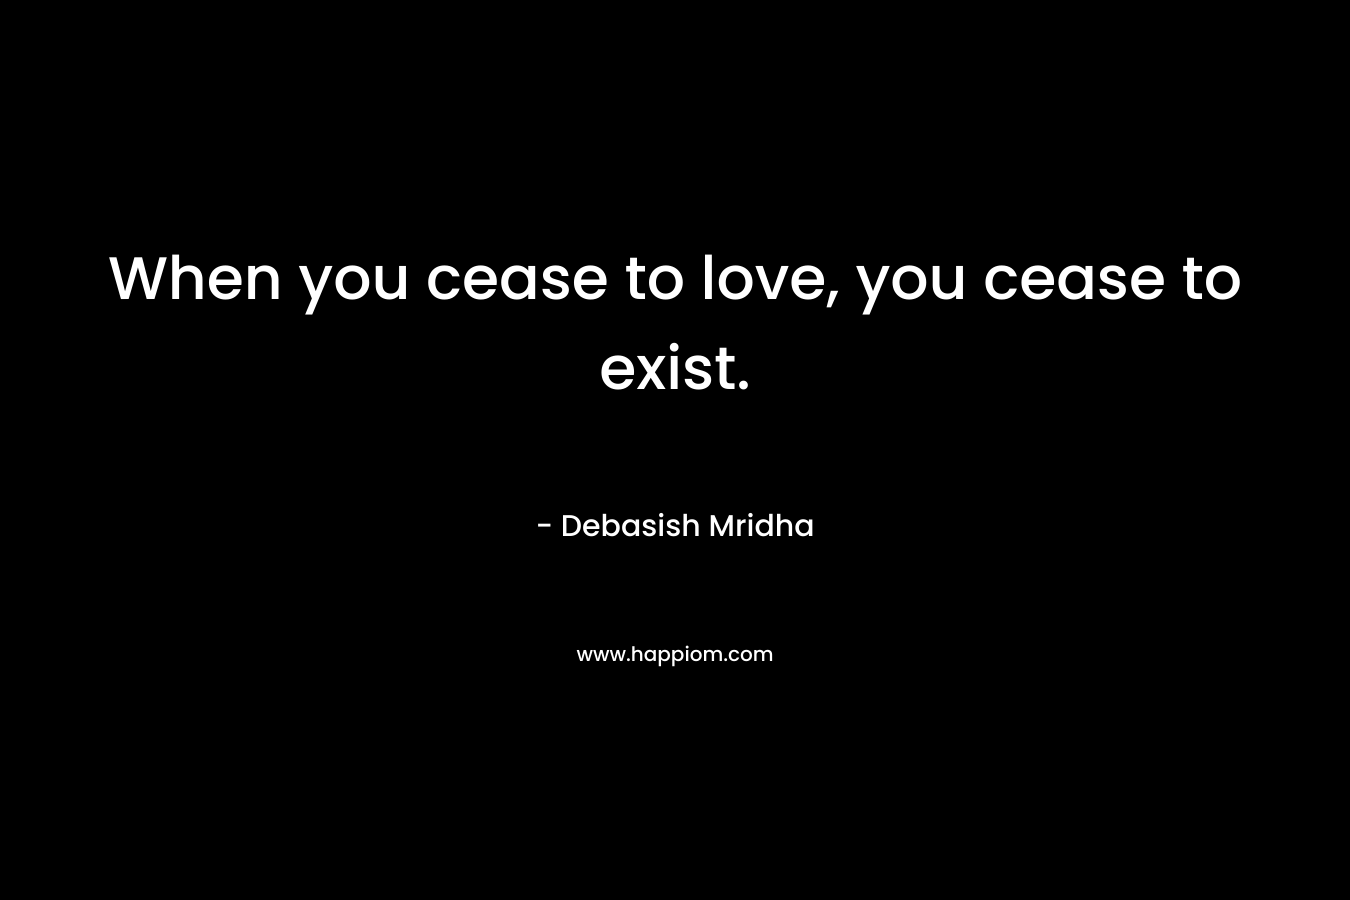 When you cease to love, you cease to exist.